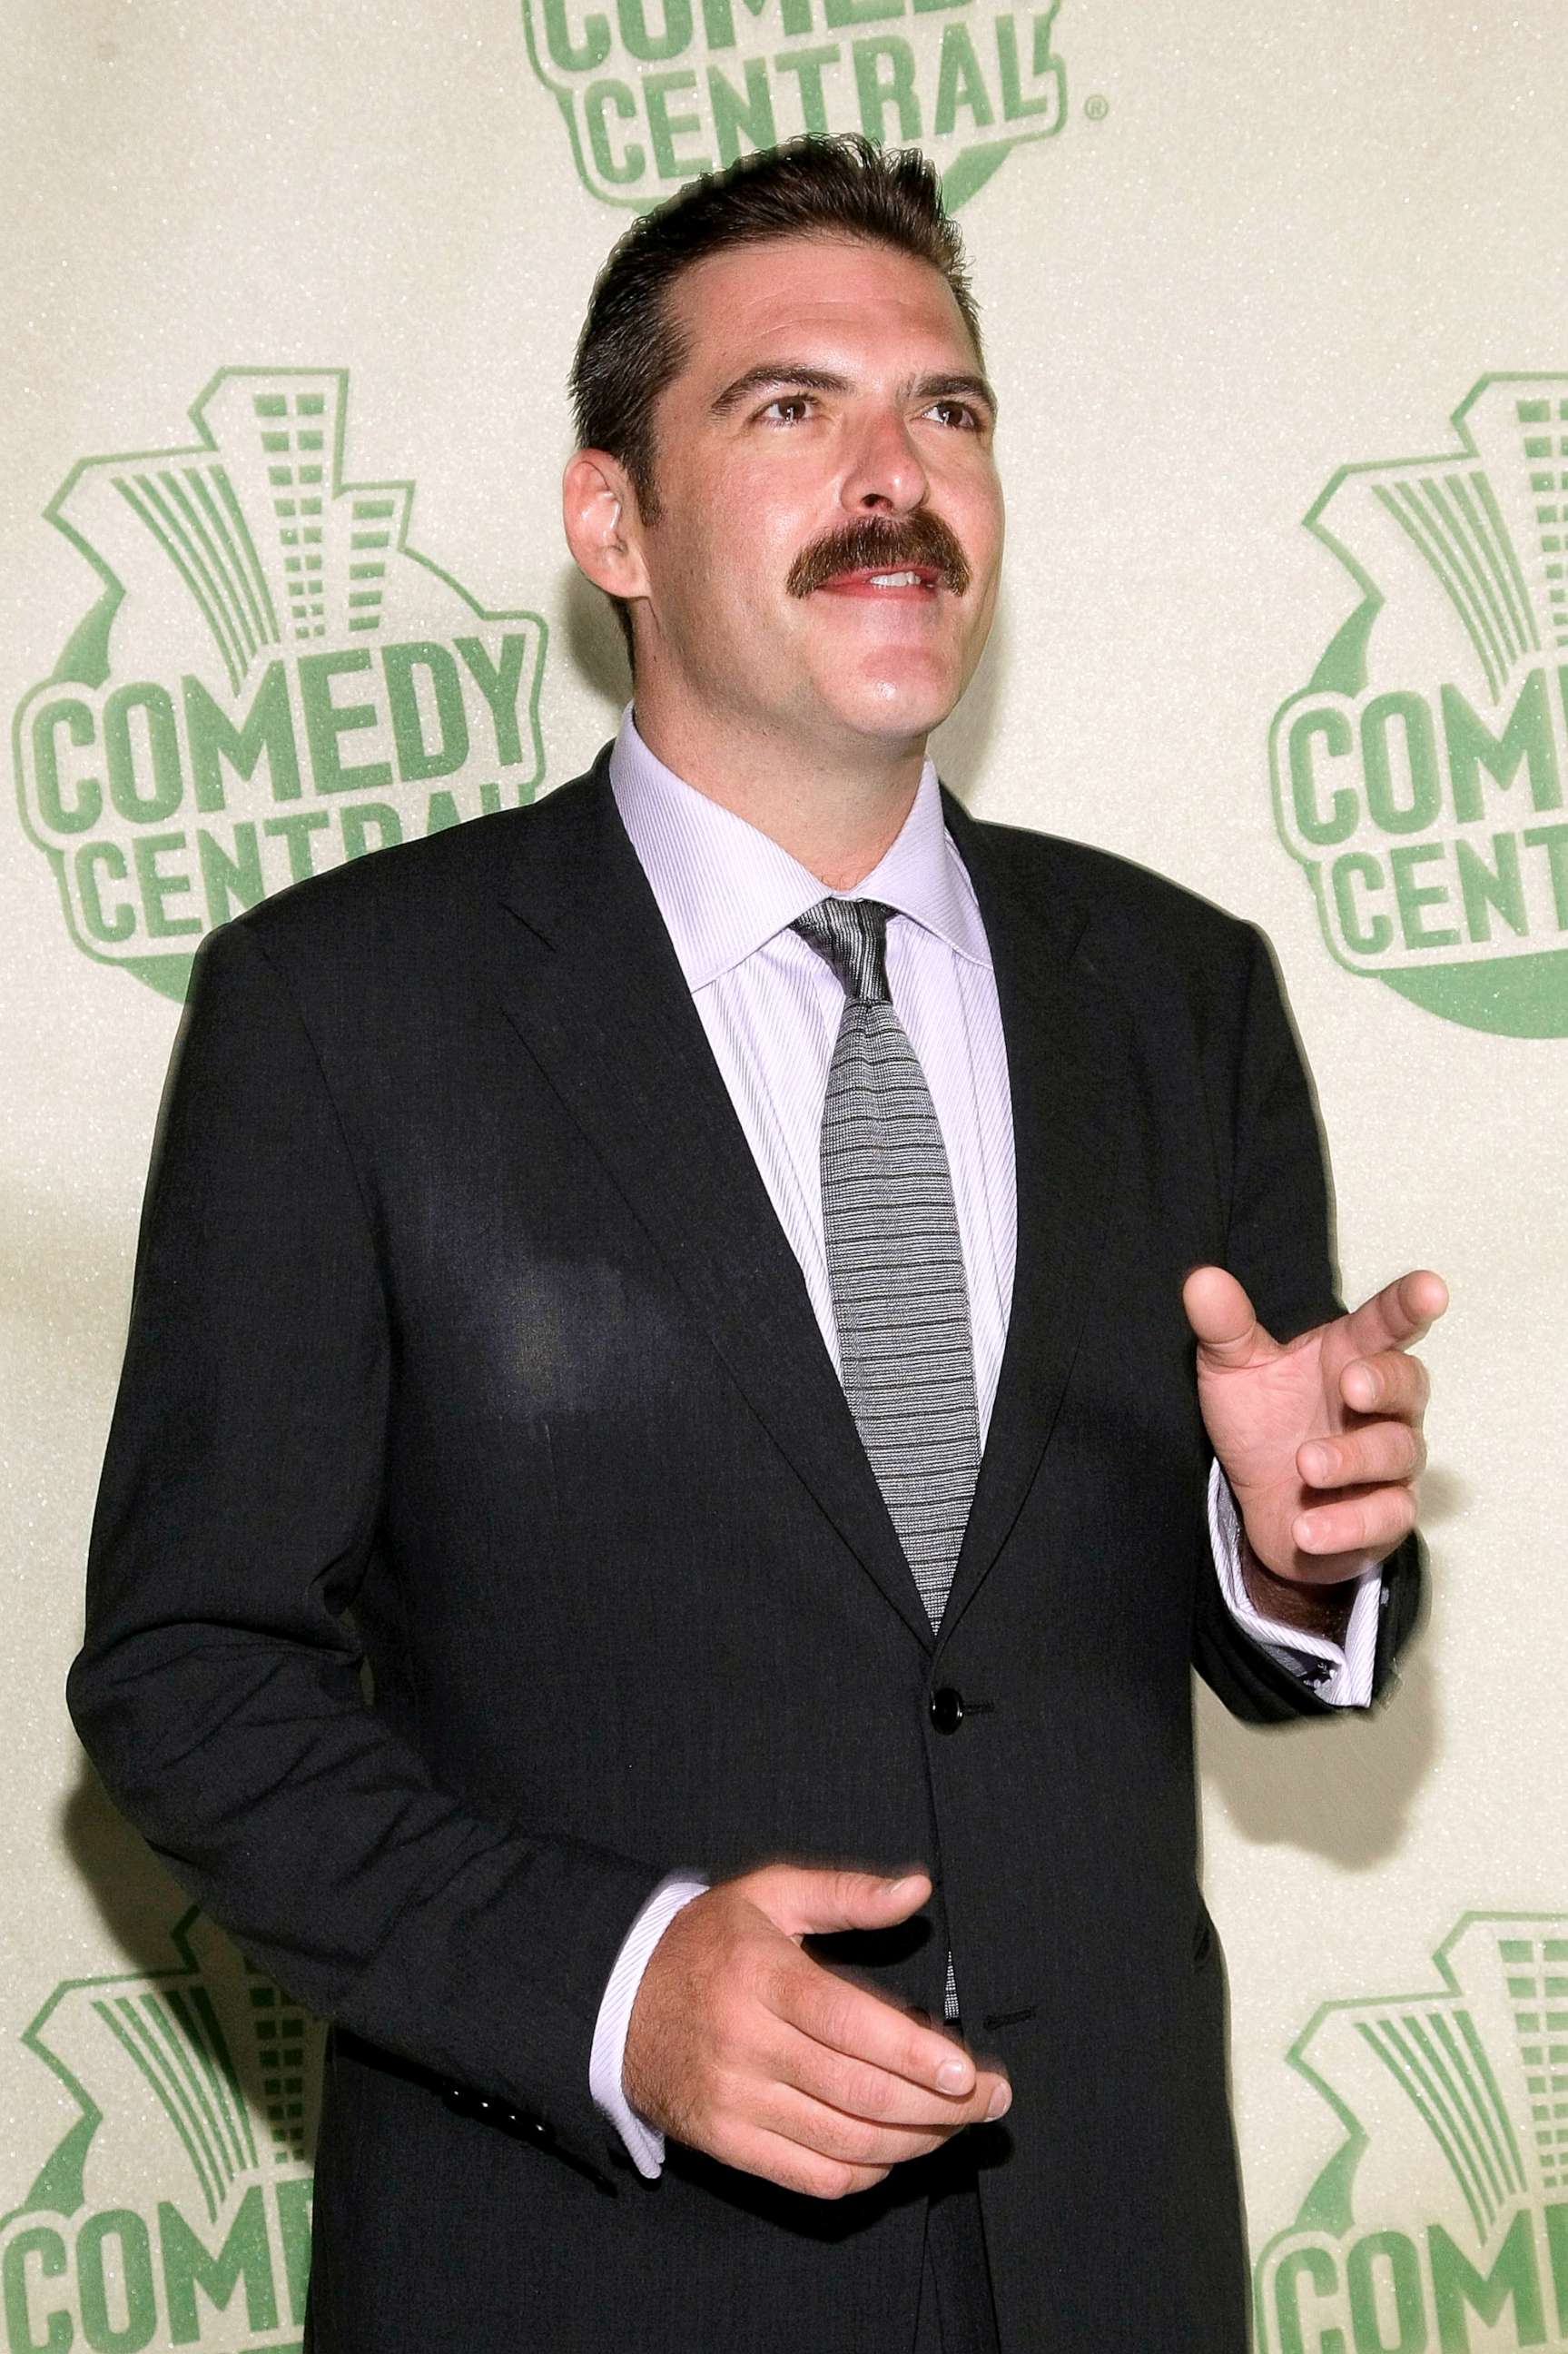 PHOTO: Jay Johnston attends the Comedy Central Emmy After Party at Falcon on September 20, 2009 in Los Angeles.